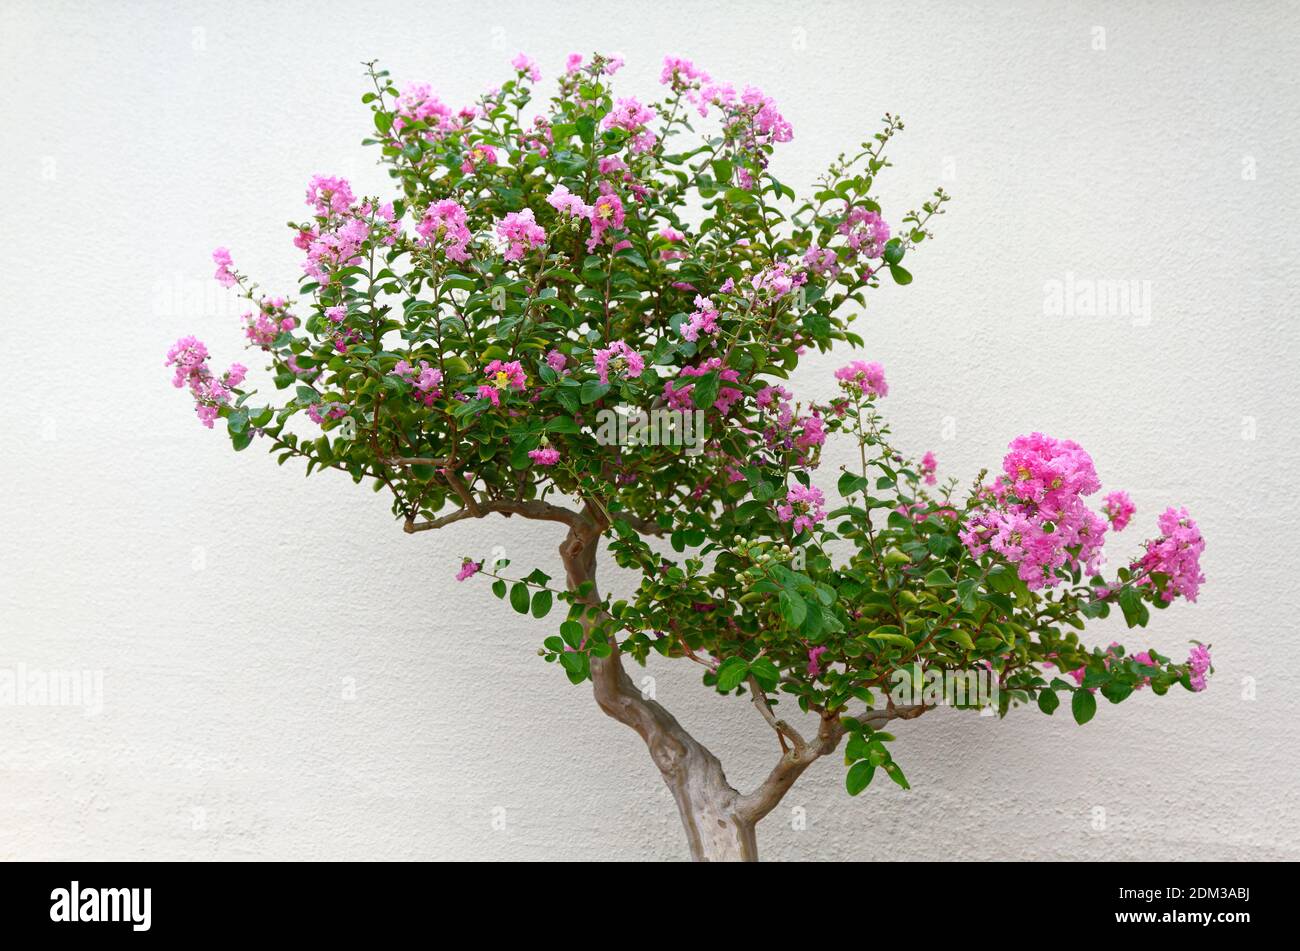 flowering bonsai tree, long-term cultivation and pruning techniques, pot confinement, miniature tree in container, skill, Stock Photo